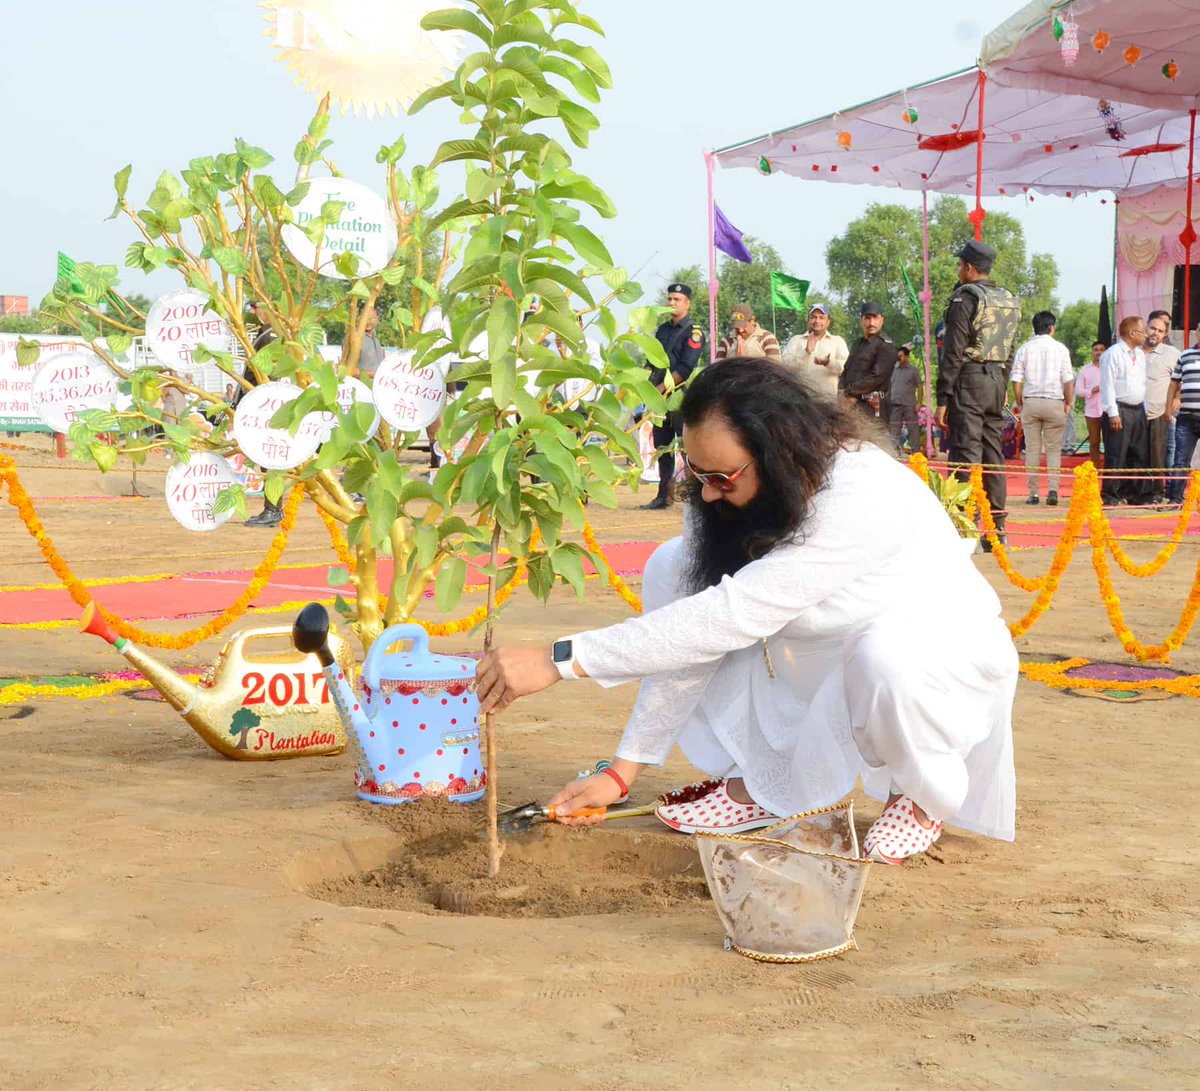 Take care of nature,environment by tree plantation.Dera Sacha Sauda followers plant tree on every occassion with the inspiration of Saint Dr MSG.🌴🌳🌴🌳🌳🌴🌴
#GoGreen #GoGreen